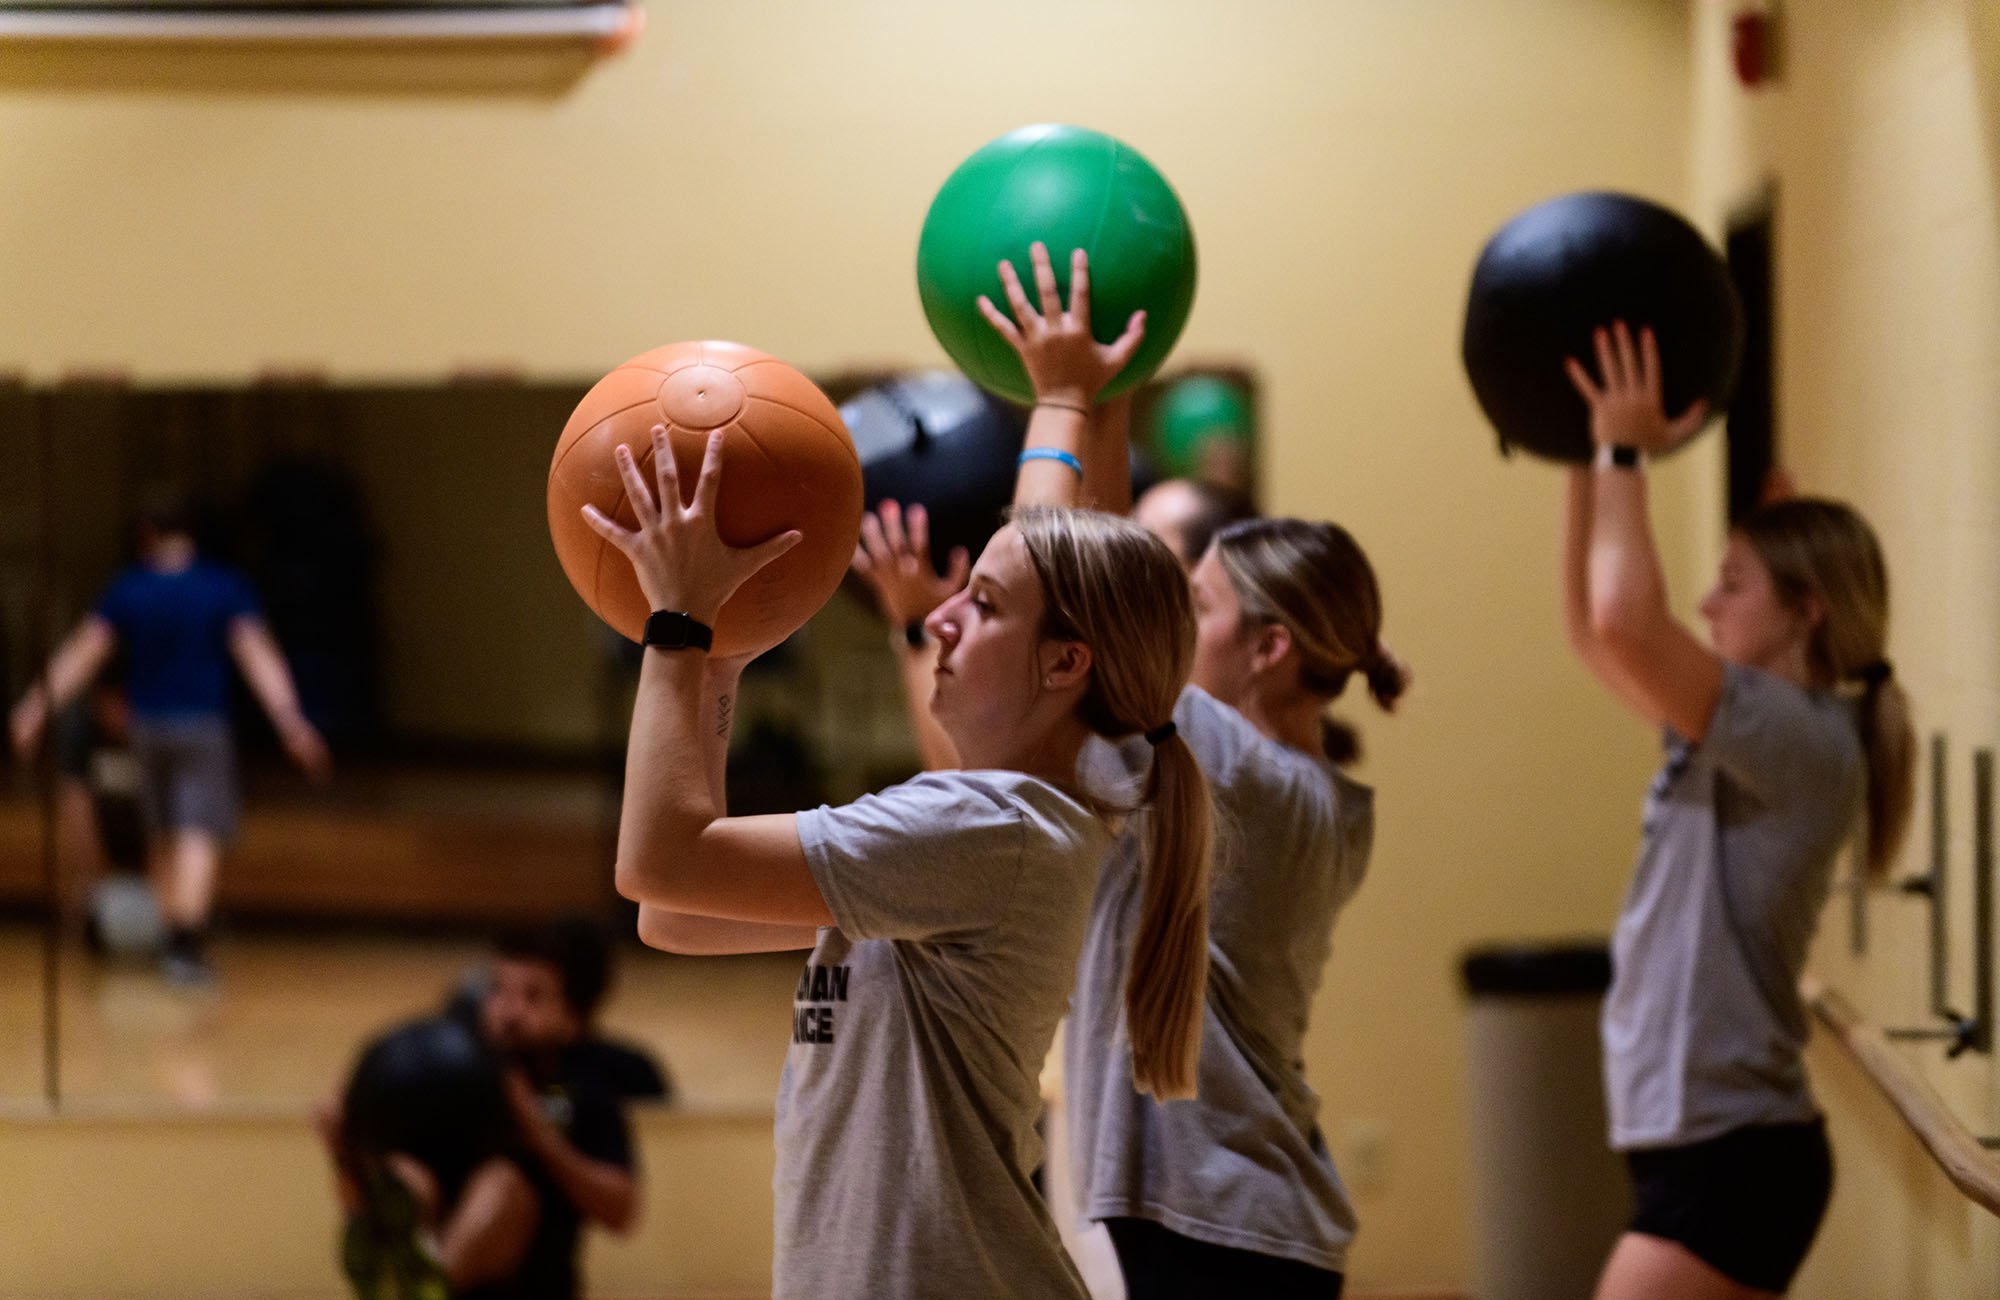 Students competing in fitness class